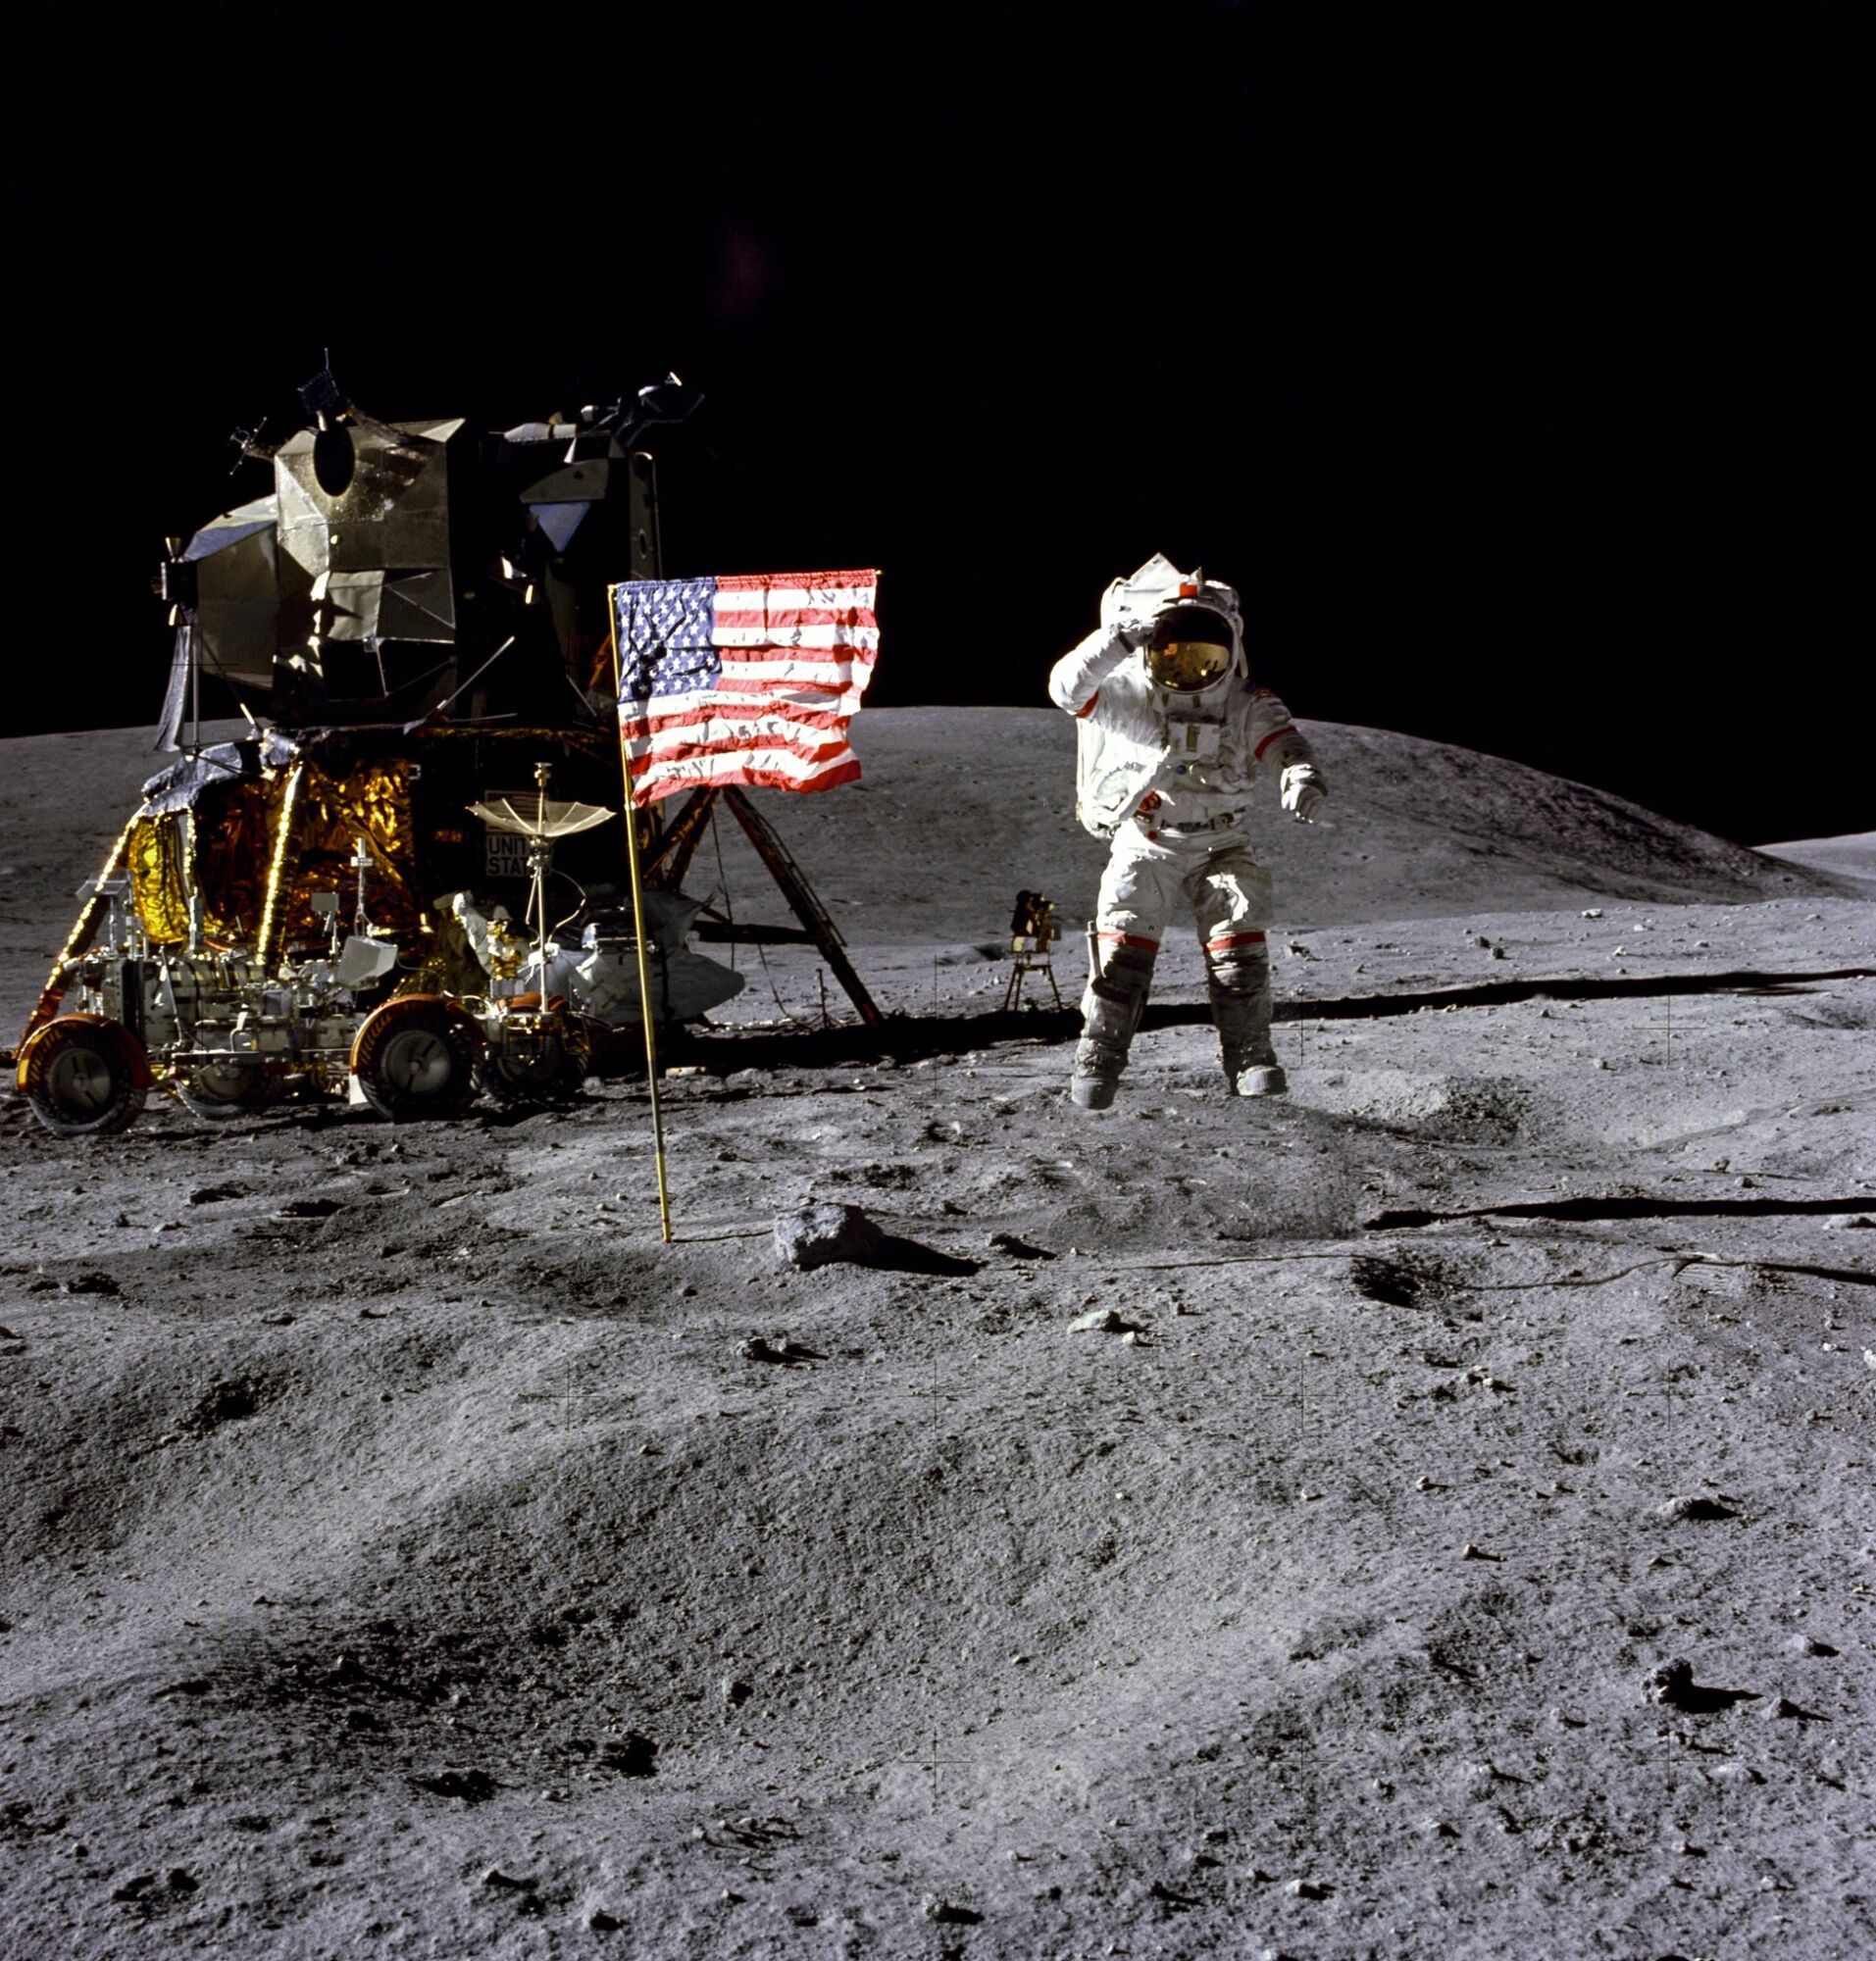 Astronaut Young saluting with flag in background during Apollo 16